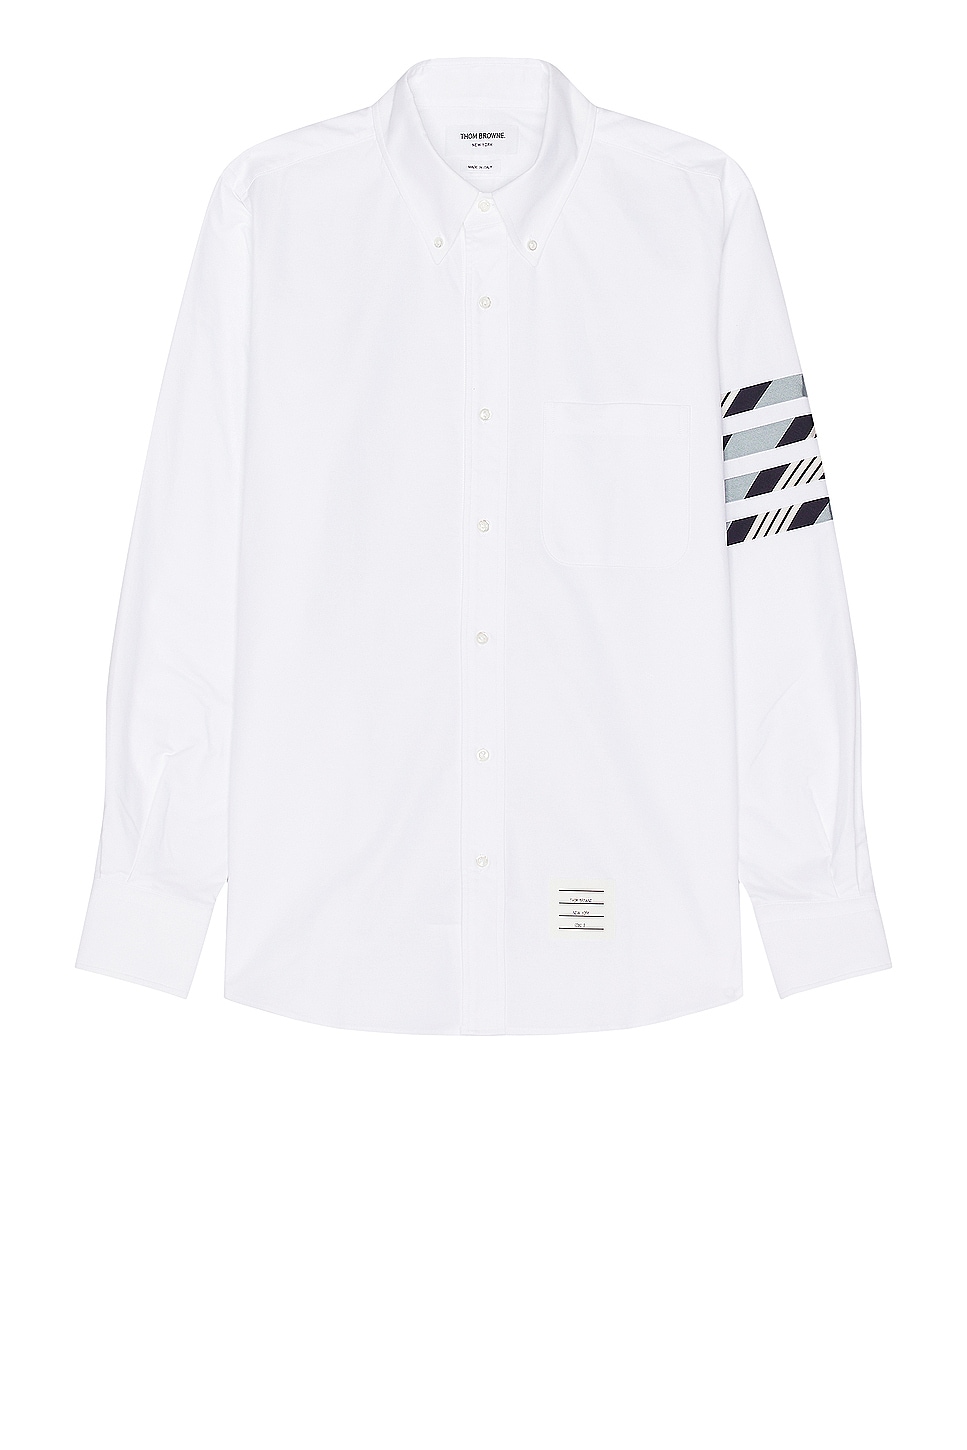 Image 1 of Thom Browne 4 Bar Straight Fit Shirt in MEDIUM BLUE